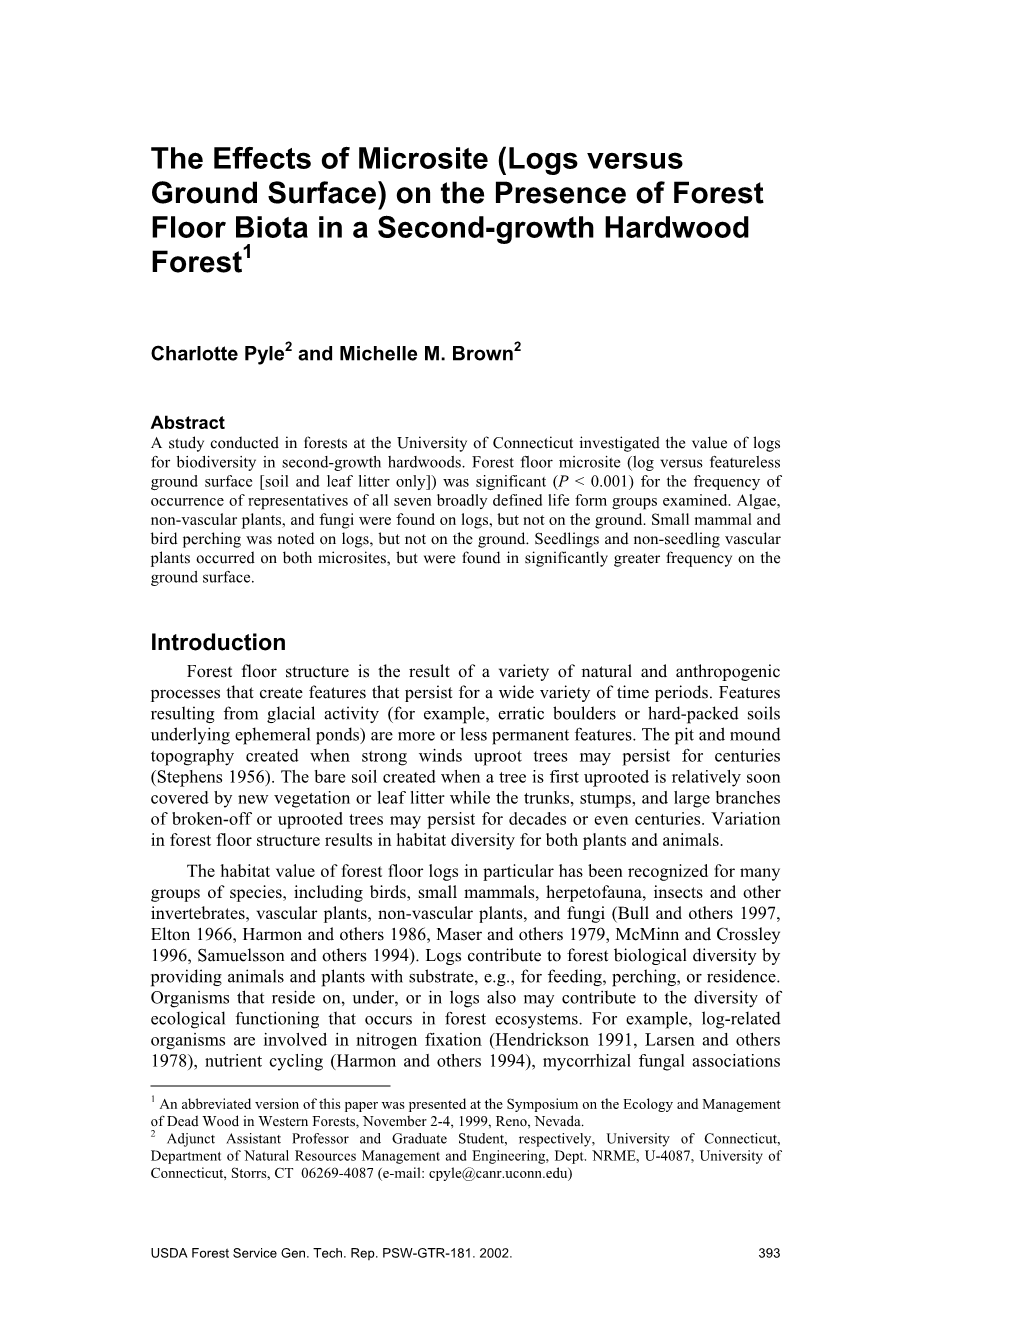 The Effects of Microsite (Logs Versus Ground Surface) on the Presence of Forest Floor Biota in a Second-Growth Hardwood Forest1